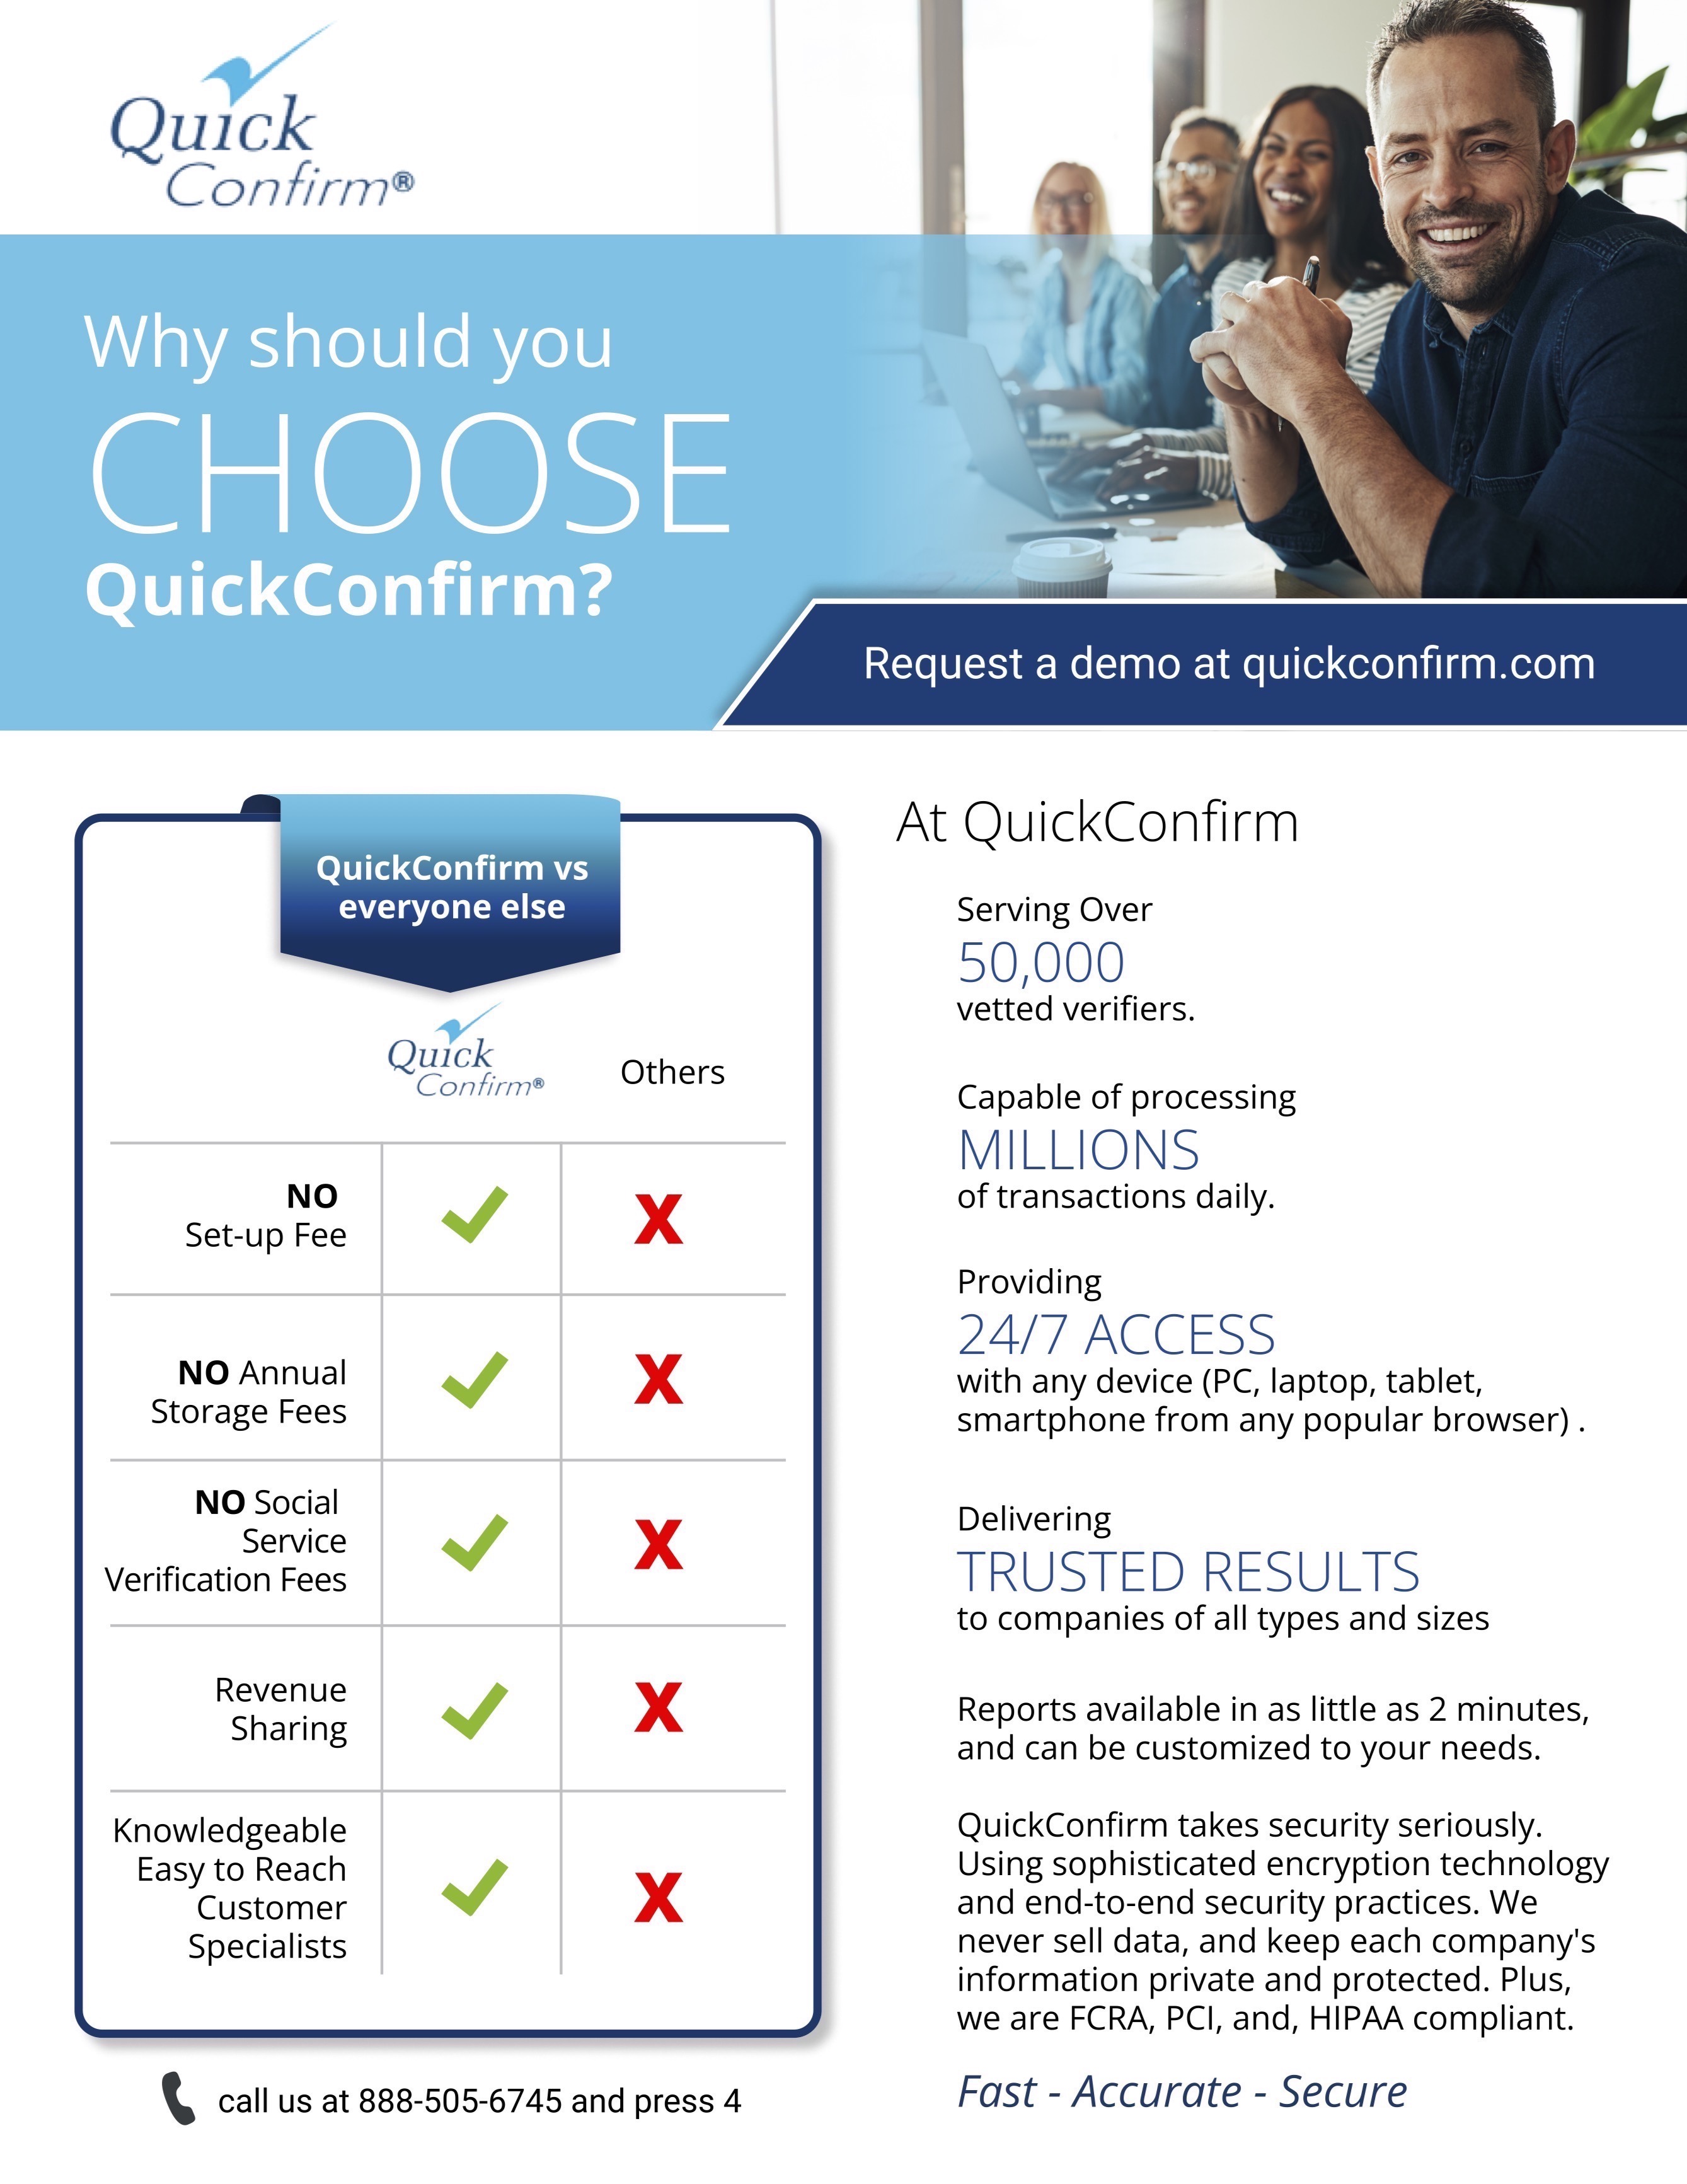 Why Choose QuickConfirm